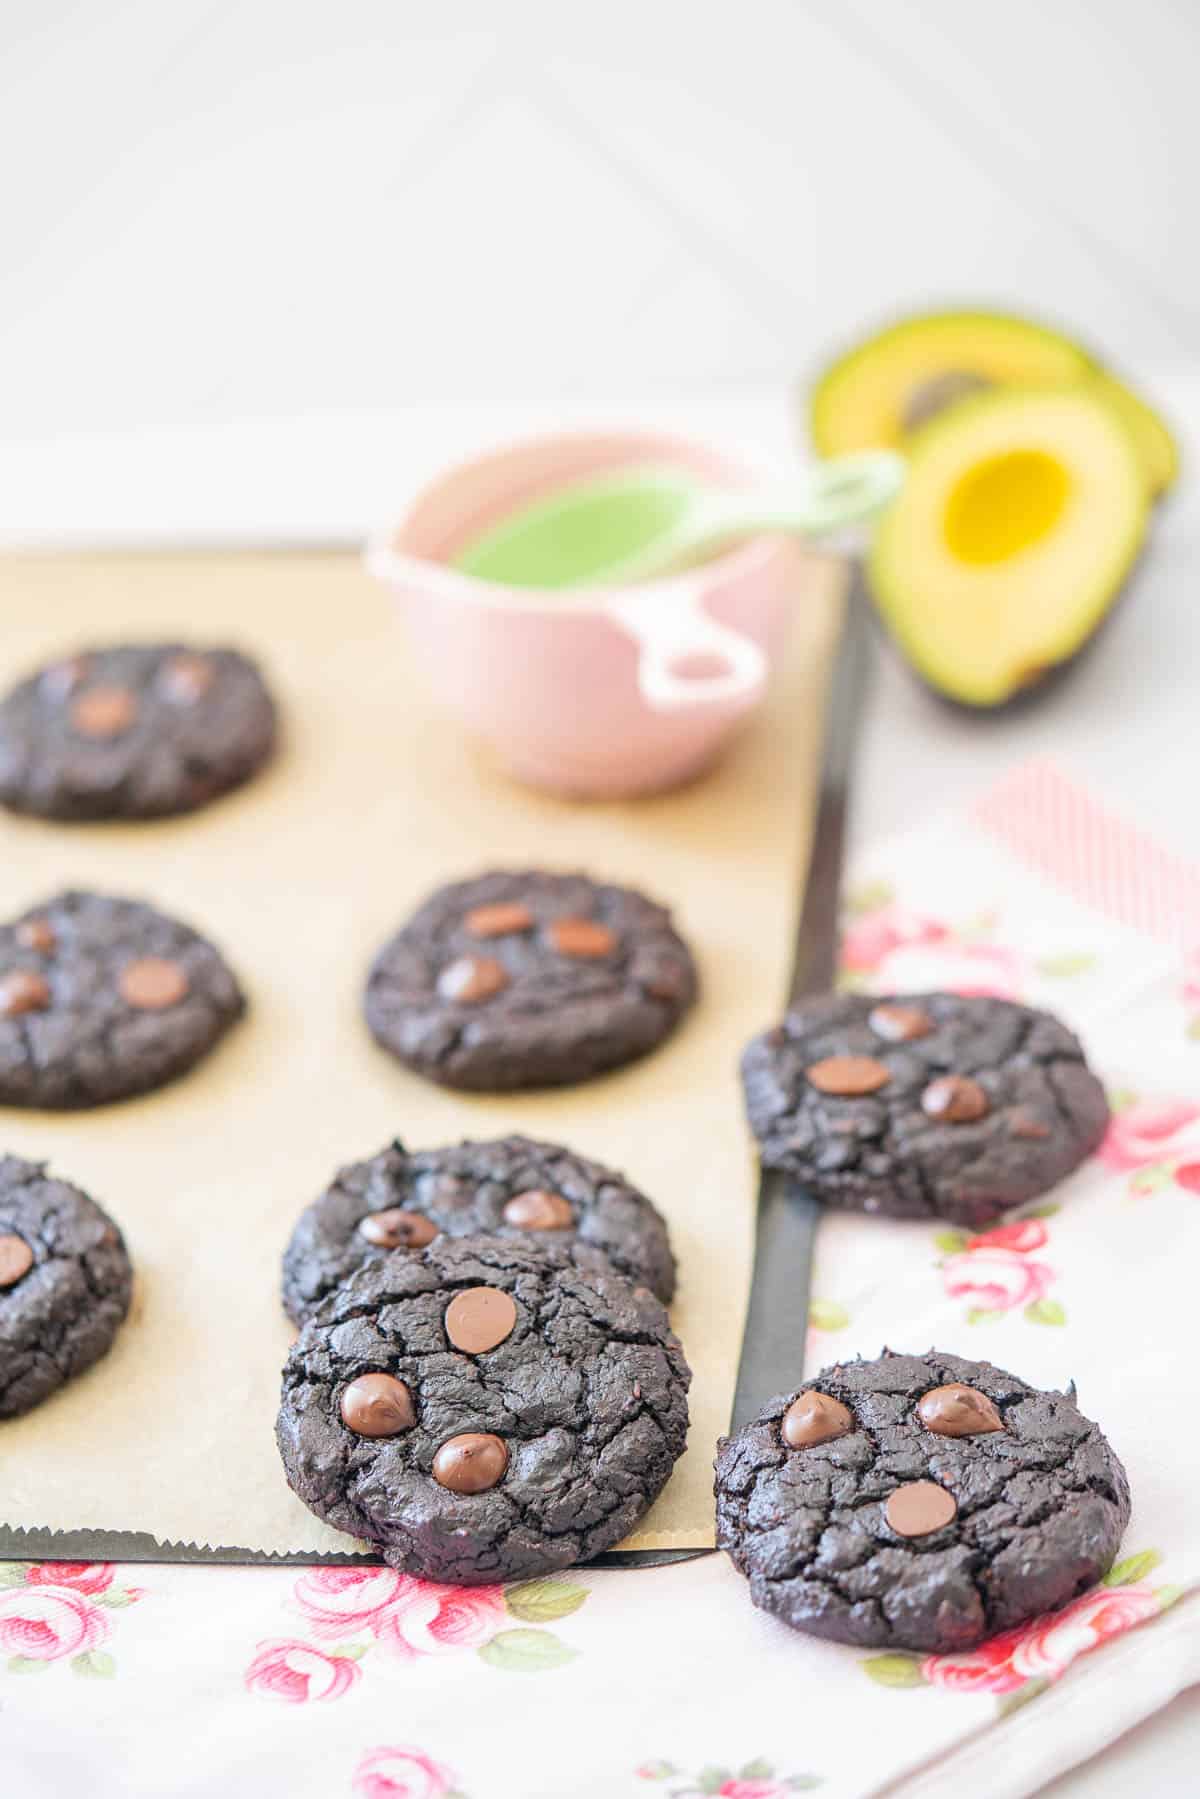 Chocolate cookies scattered on a pink floral tea towel